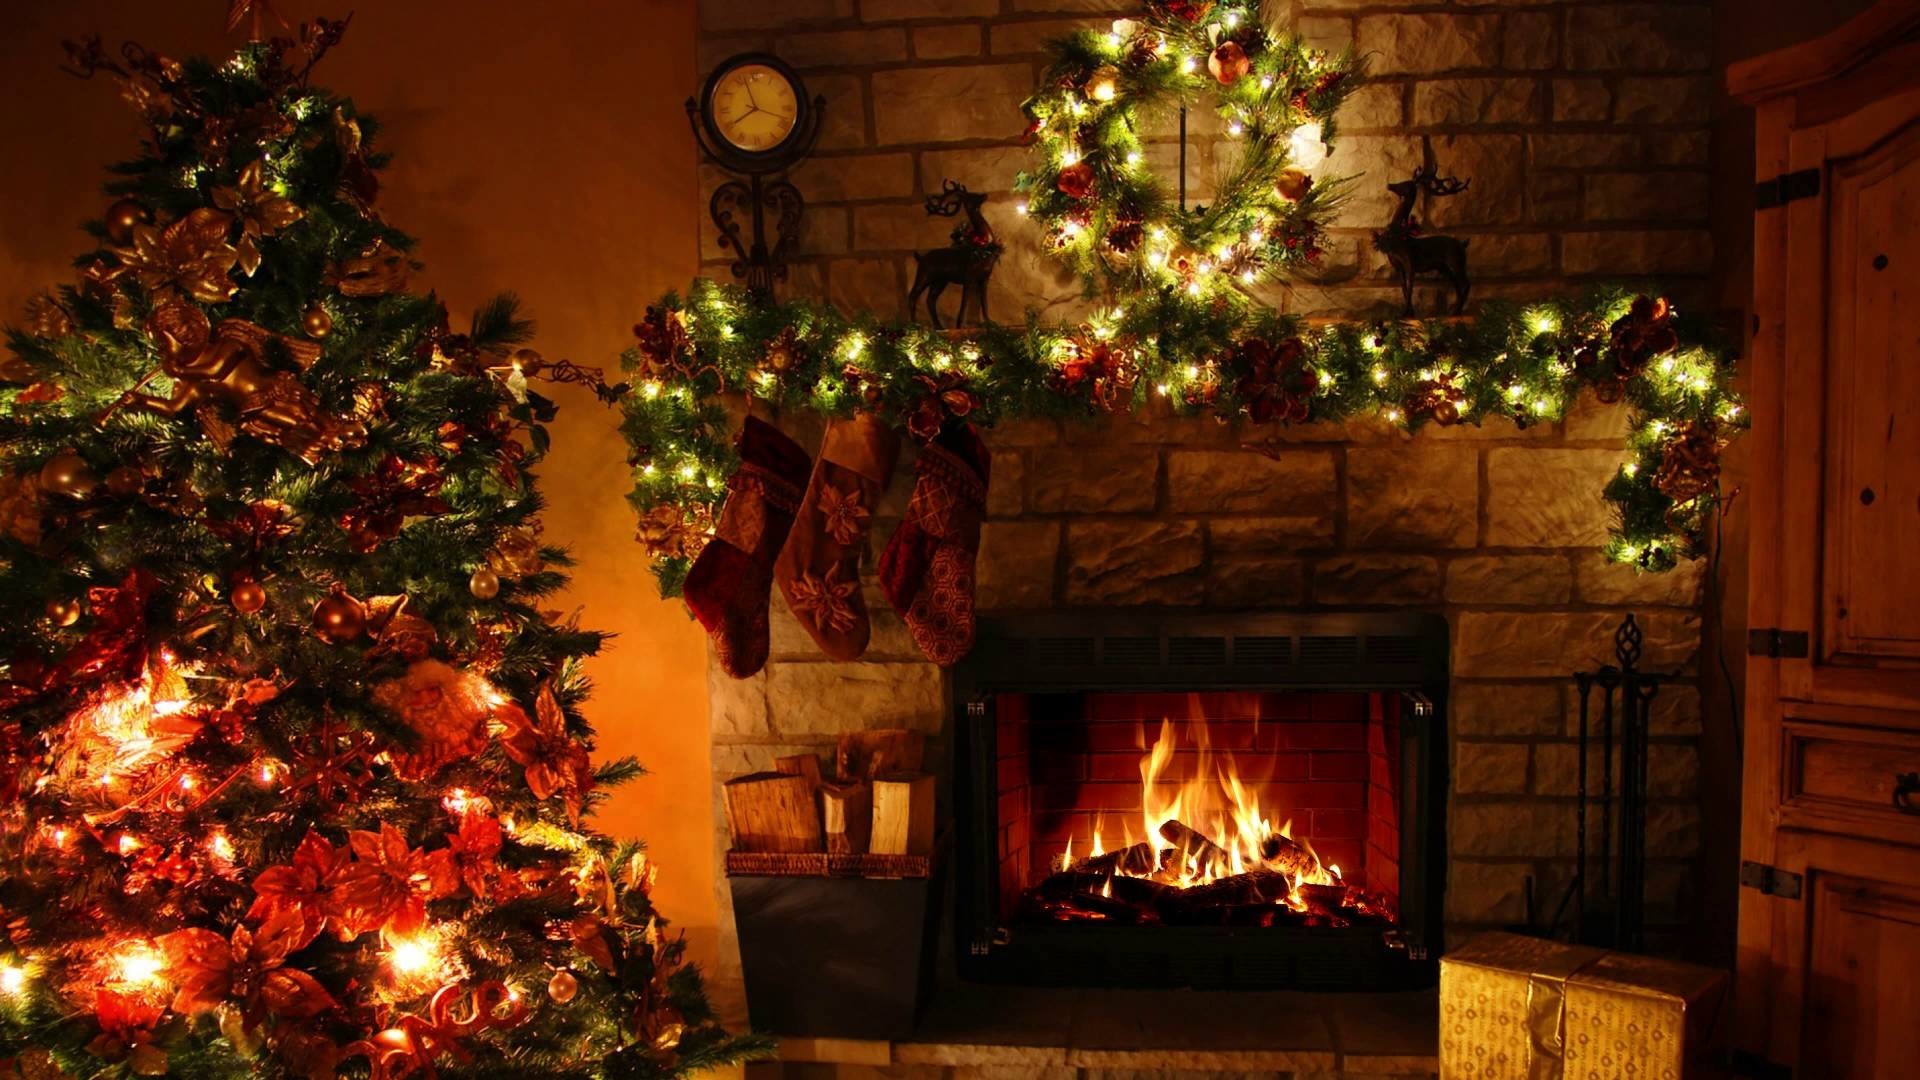 1920x1080  Christmas fireplace fire holiday festive decorations eq wallpaper  .